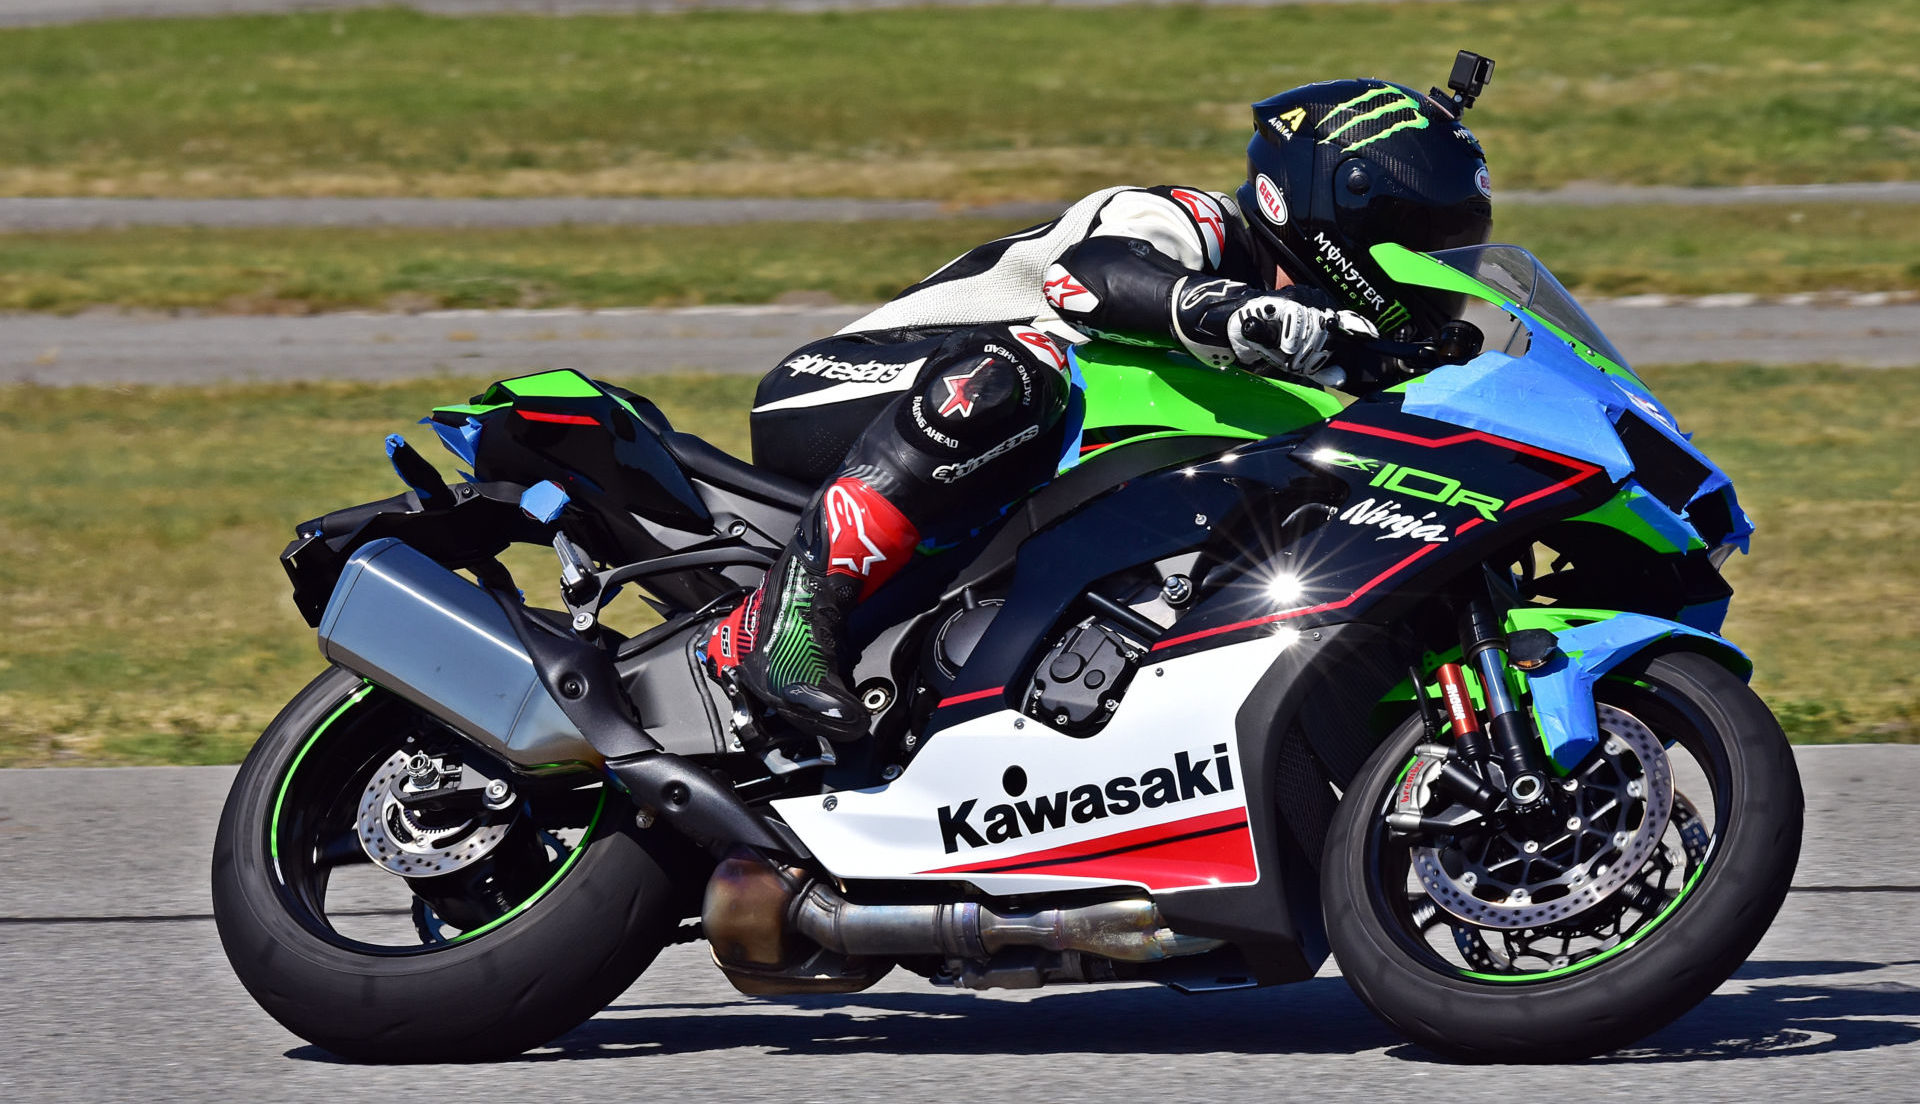 Off-road legend Jeremy McGrath on a Kawasaki ZX-10R at Auto Club Speedway with Fastrack Riders. Photo by Michael Gougis.